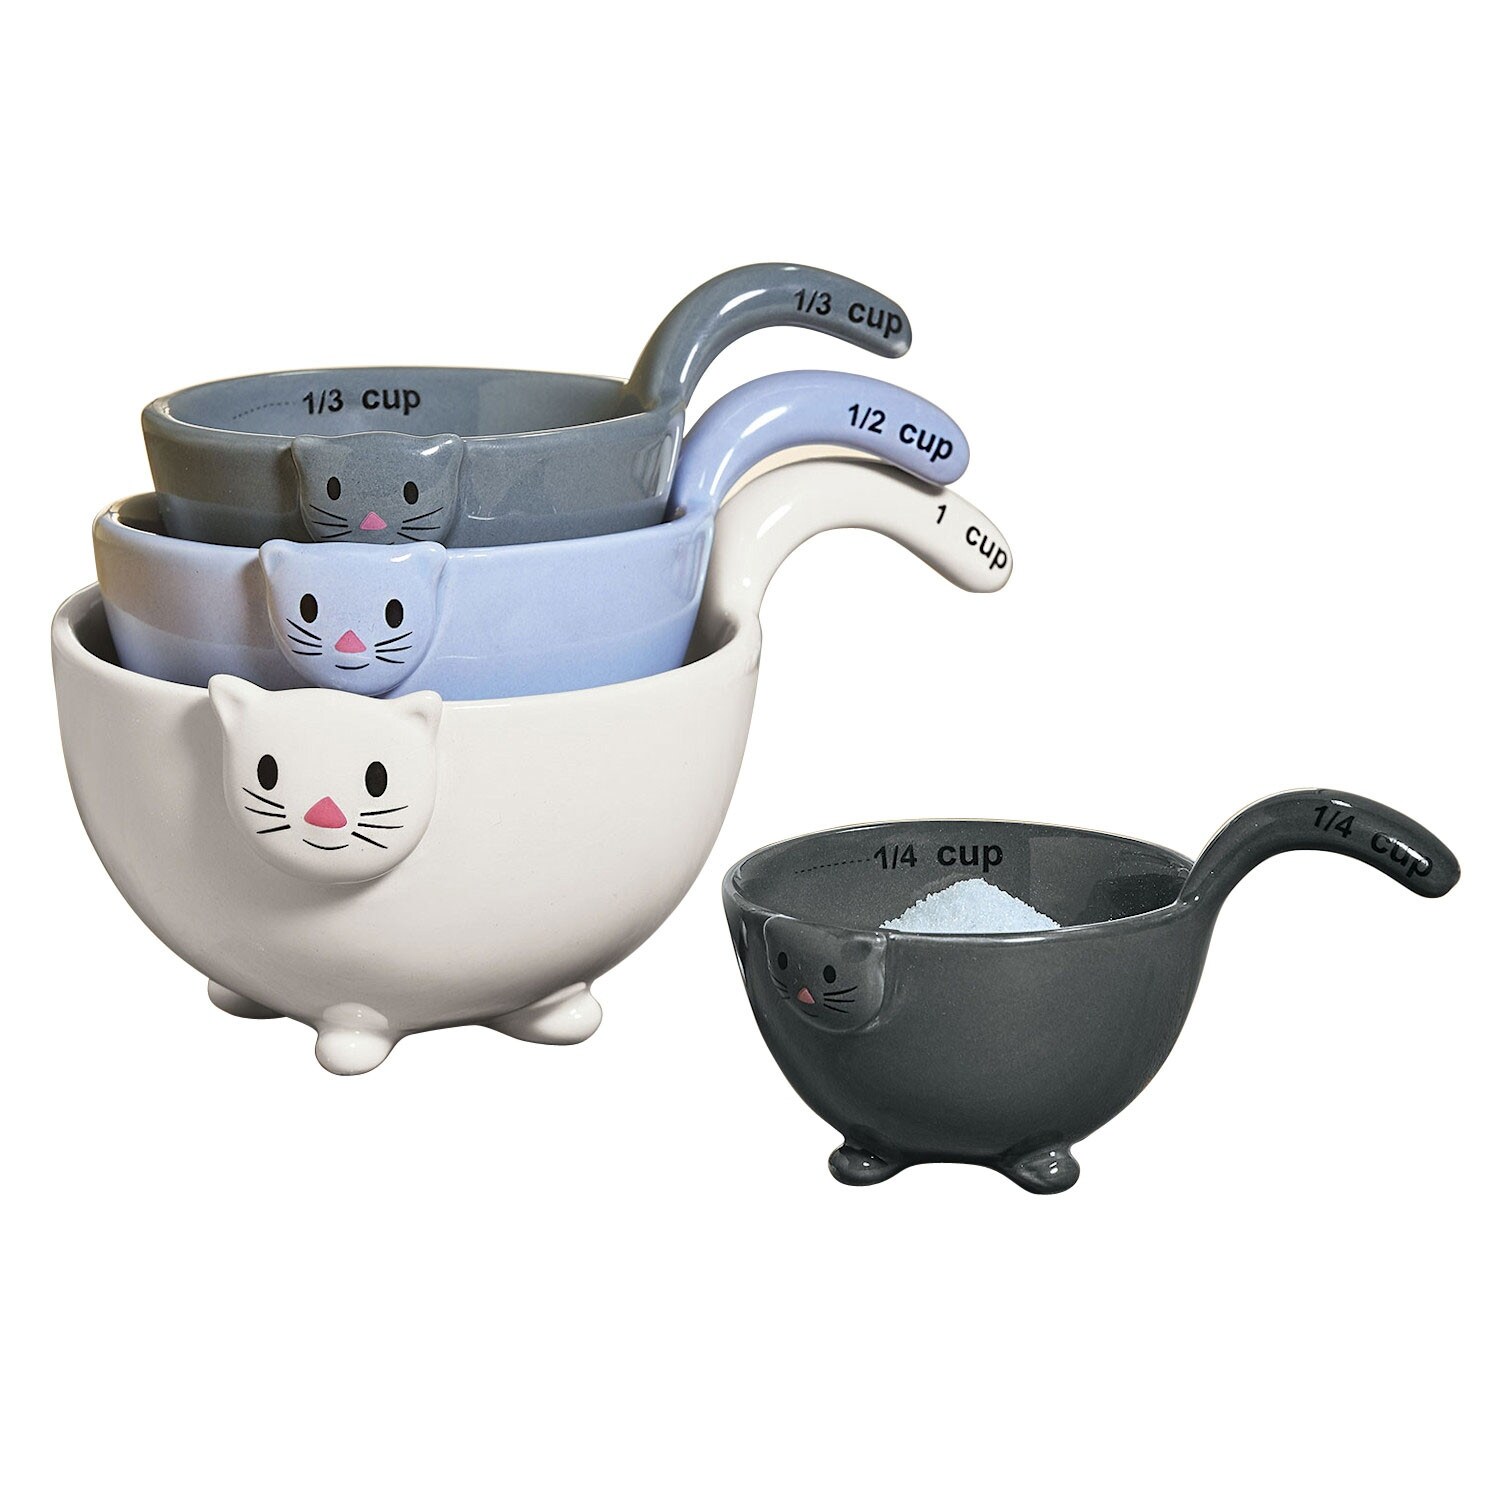  Cat Measuring Cups and Spoons Set with Pan Equivalents